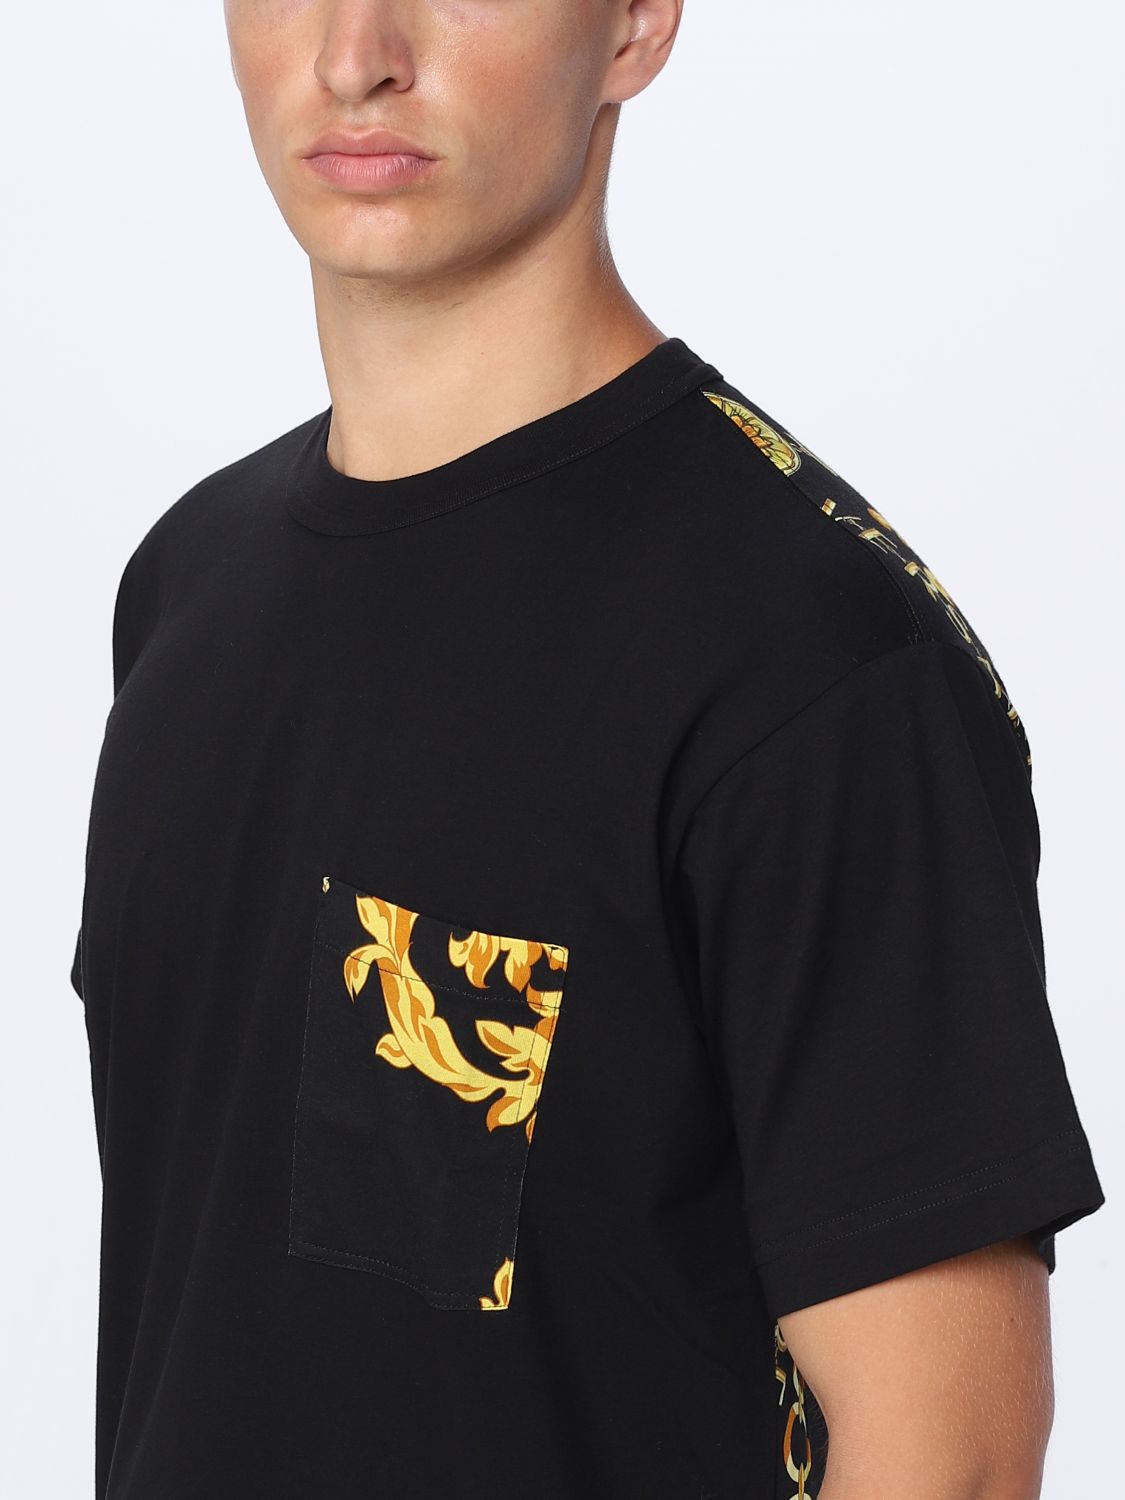 2 VERSACE JEANS COUTURE ブラック Tシャツ XL | www.yokecomms.com